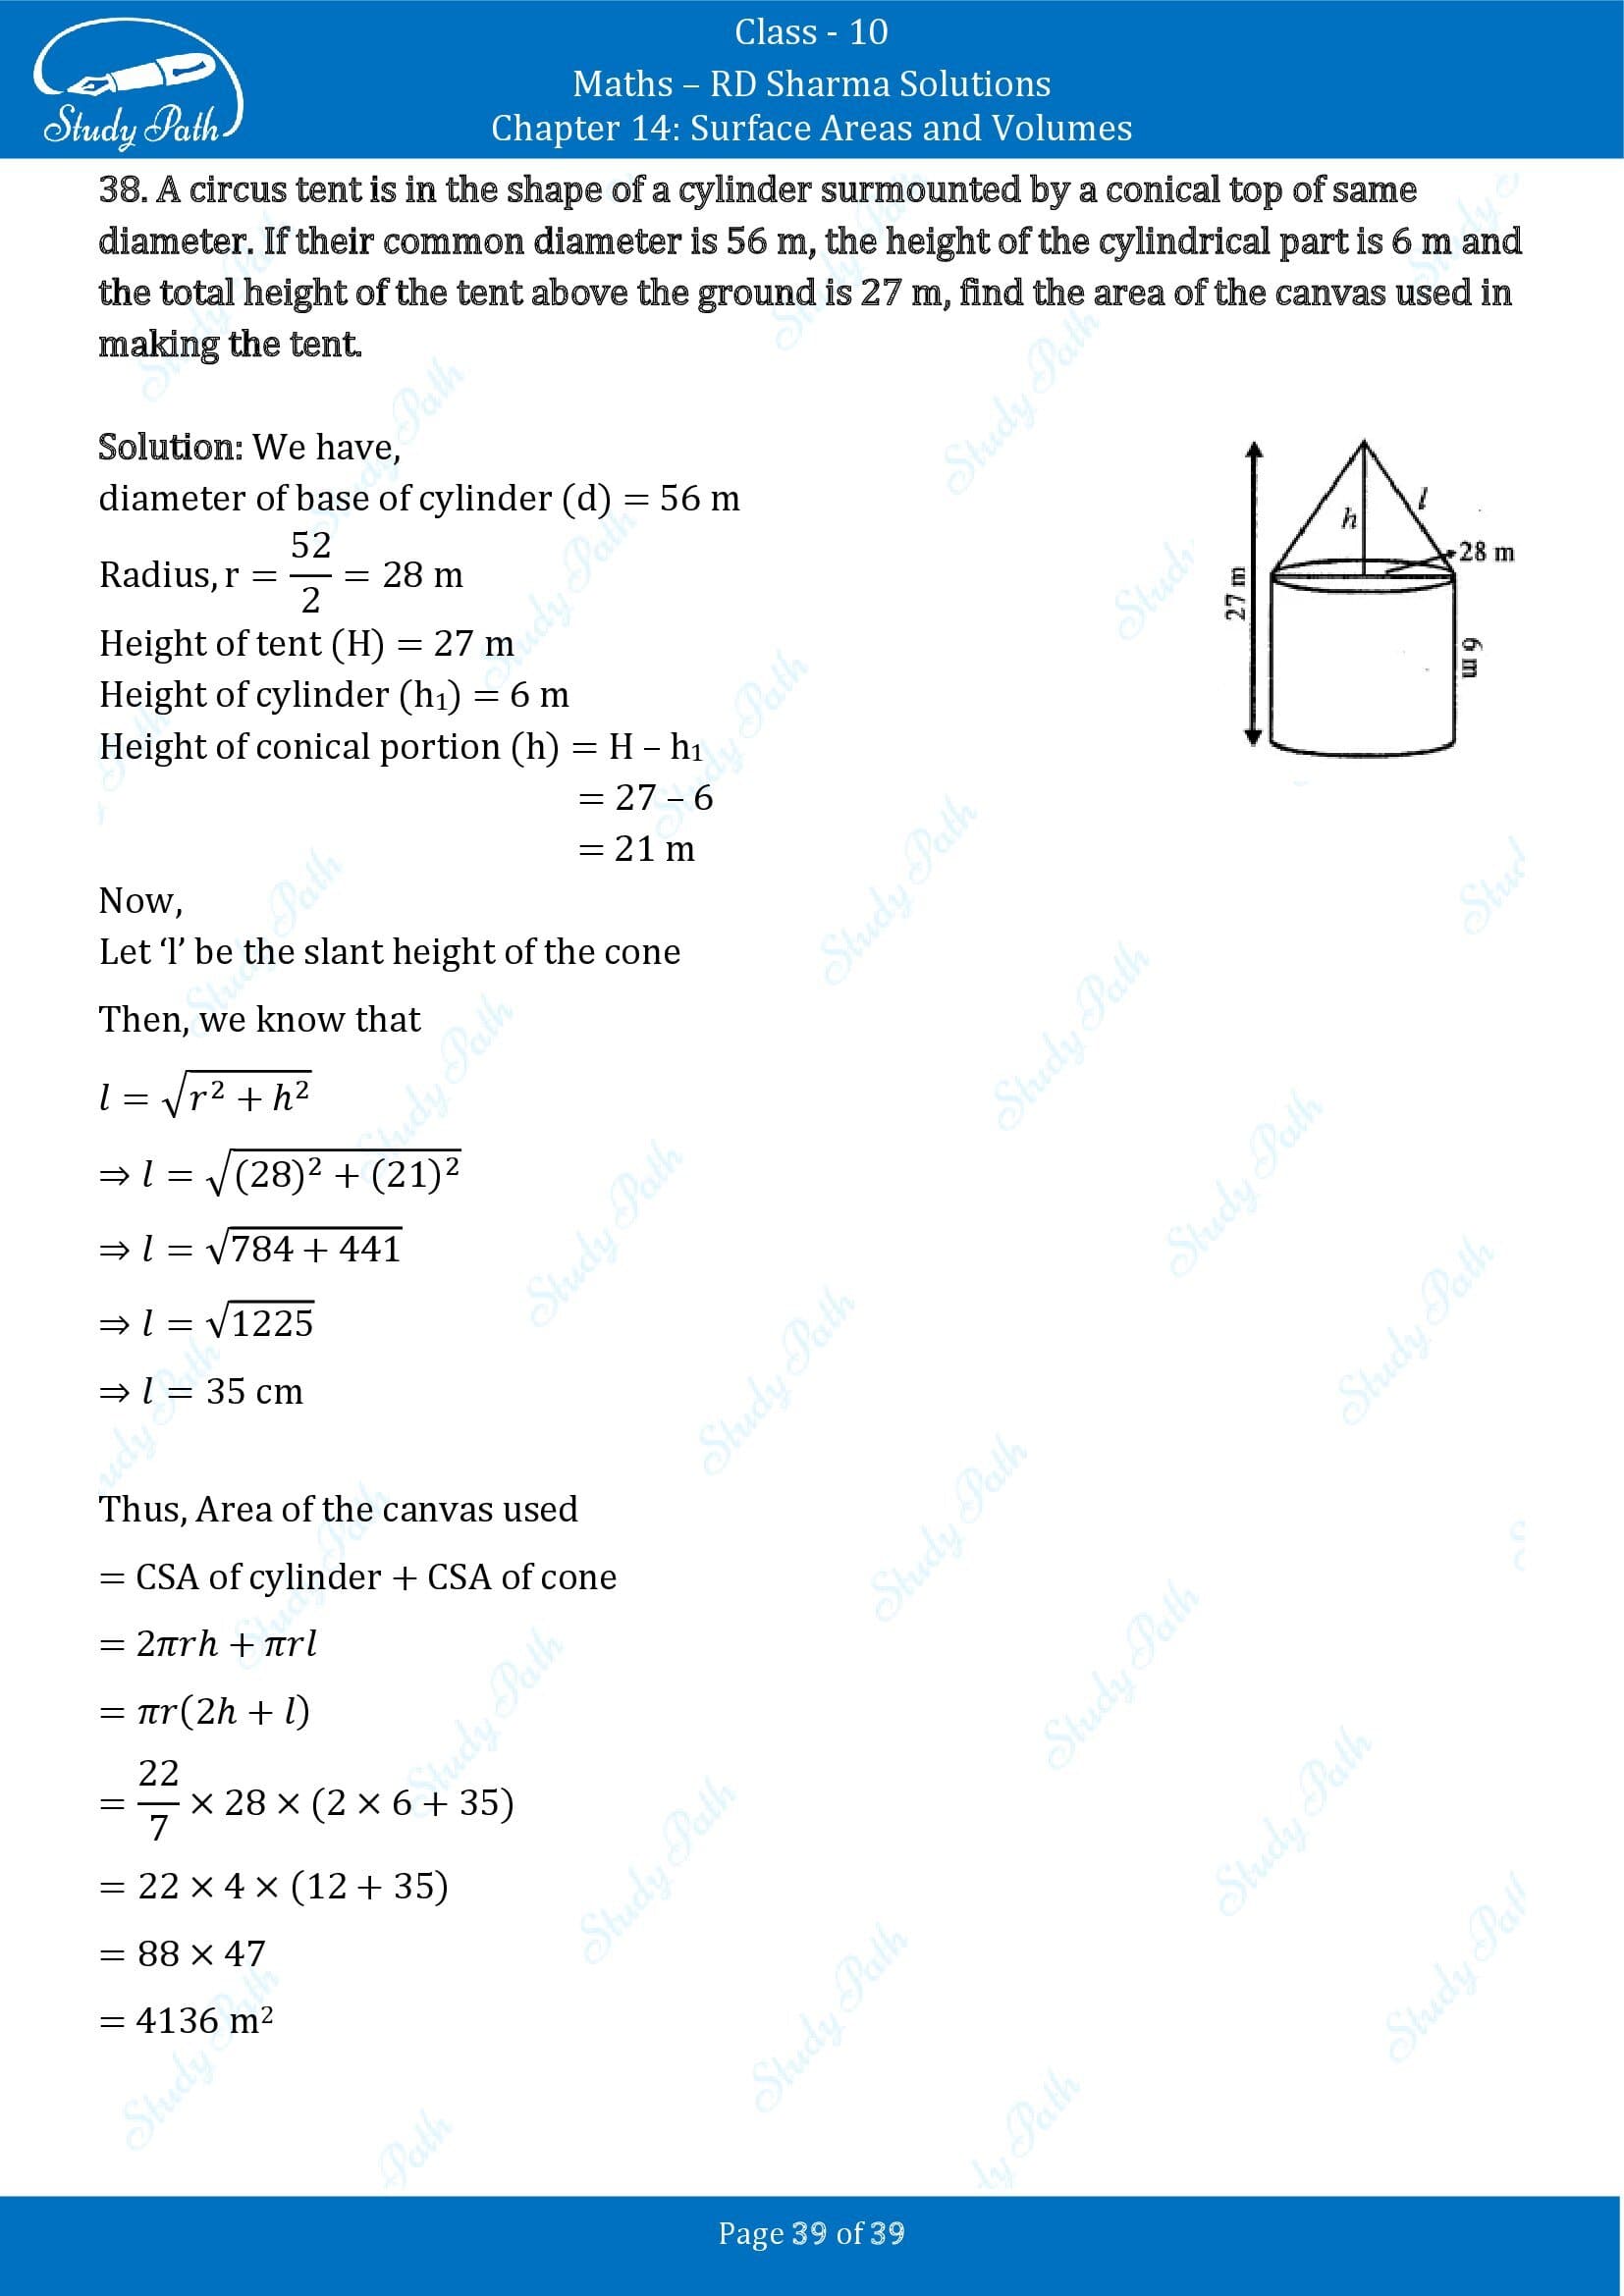 RD Sharma Solutions Class 10 Chapter 14 Surface Areas and Volumes Exercise 14.2 00039